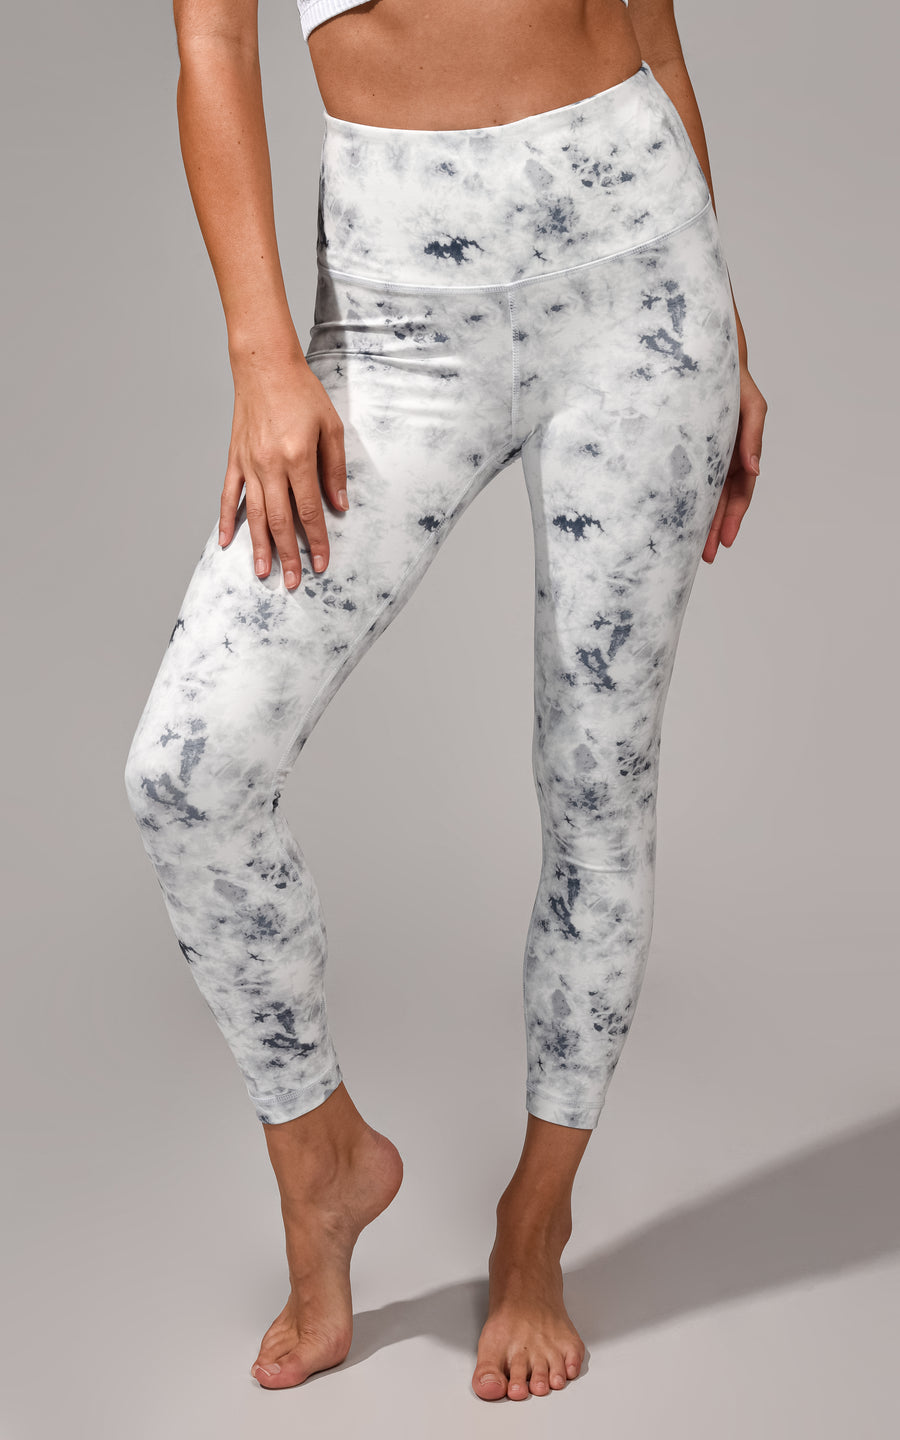 Yogalicious Lux High Waist Camo Printed 7/8 Ankle Legging